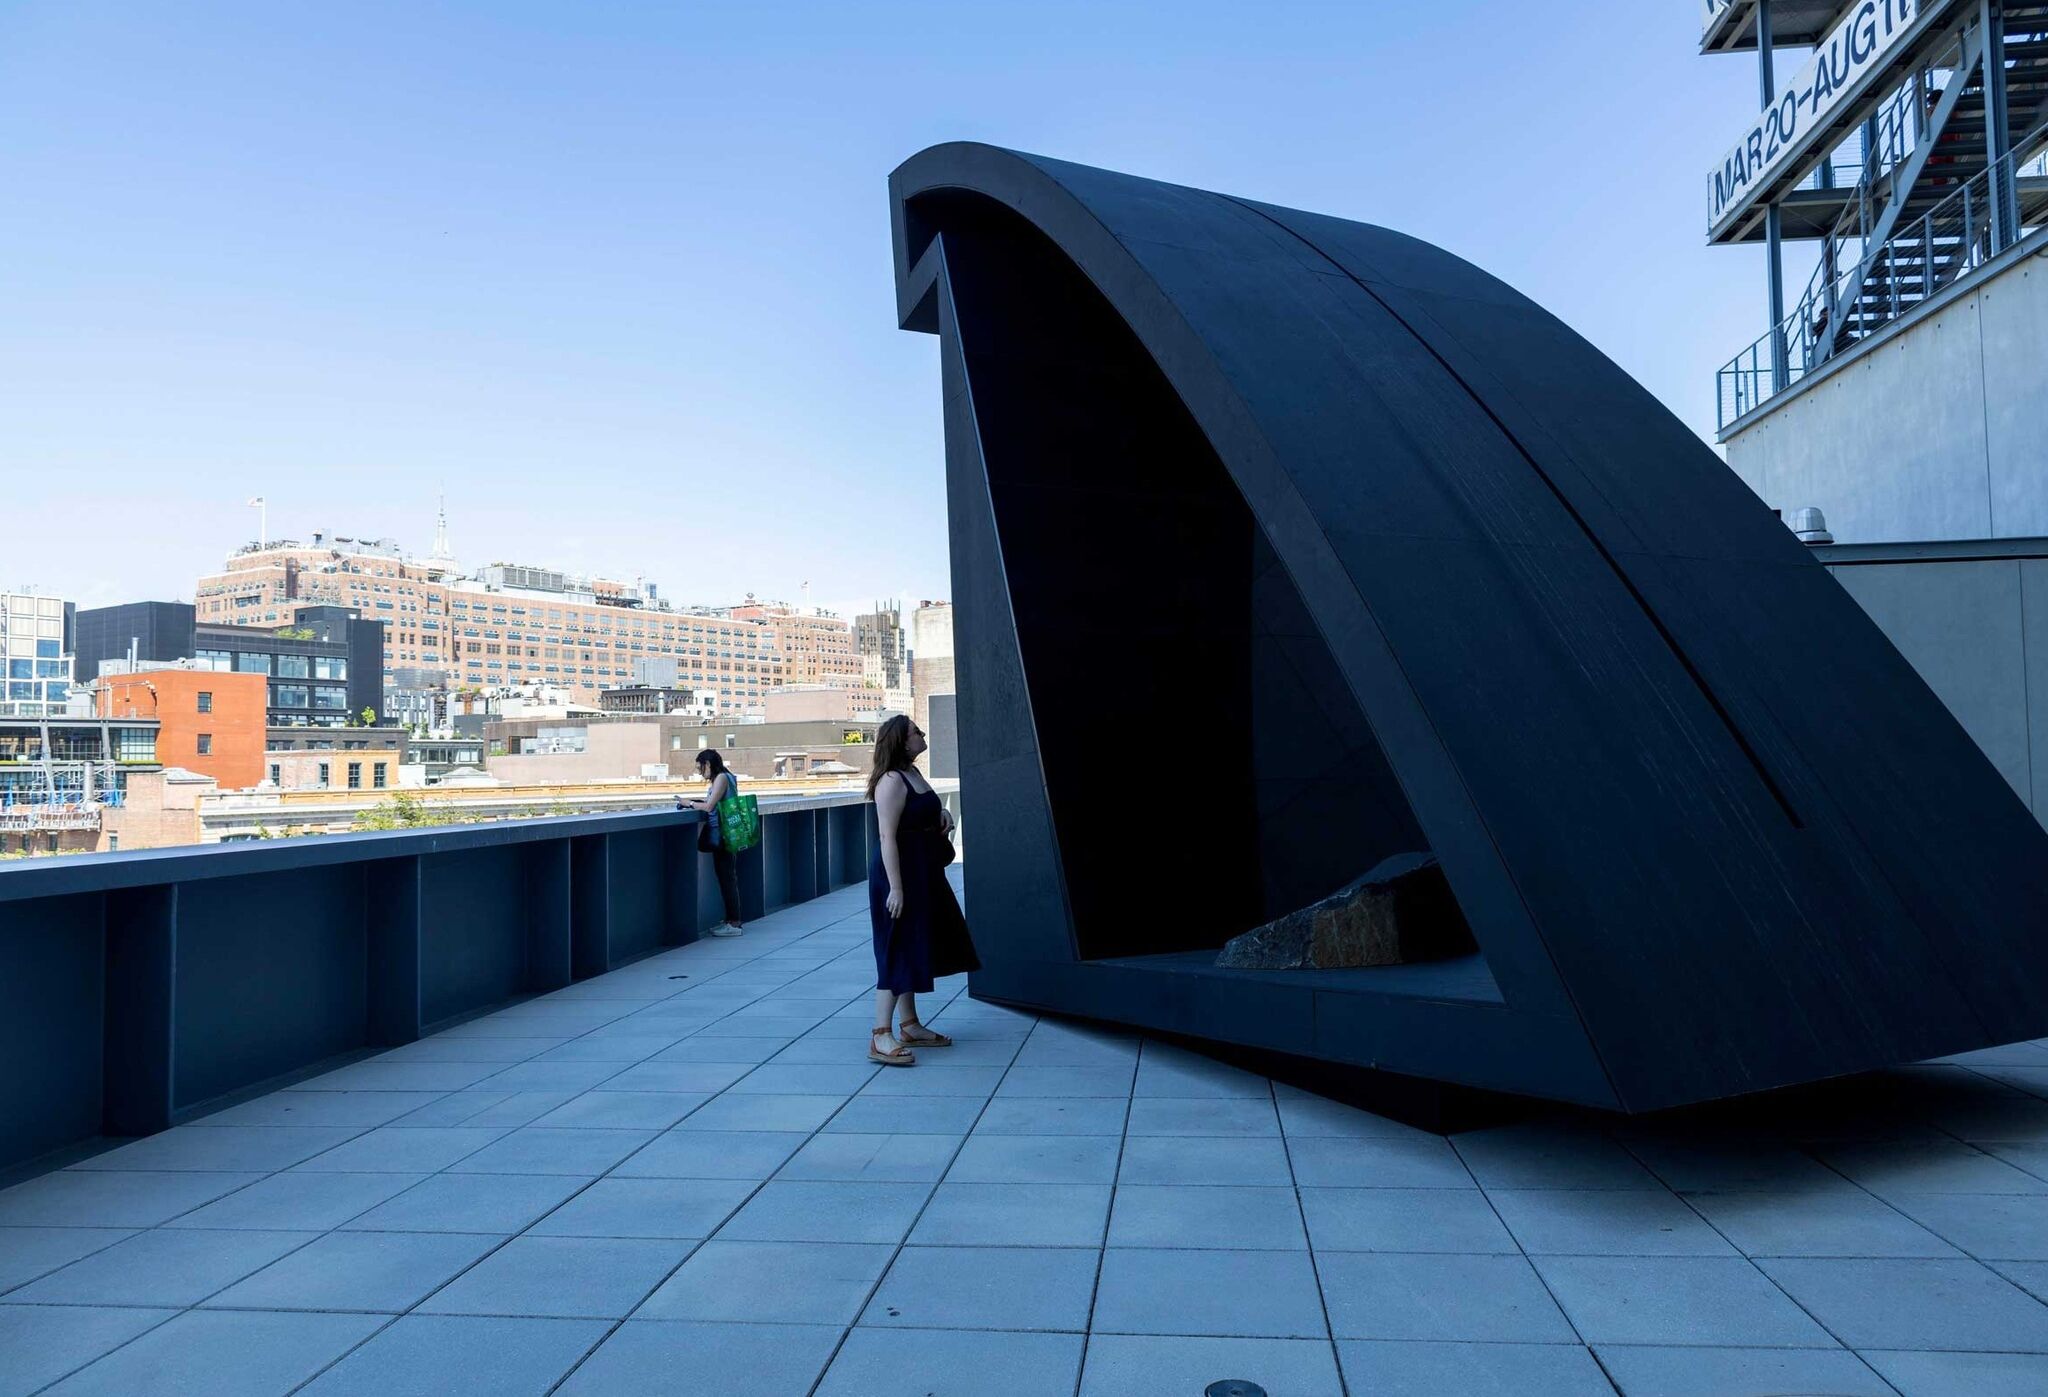 Two people stand on a rooftop terrace with a large, curved black sculpture. City buildings are visible in the background under a clear sky.